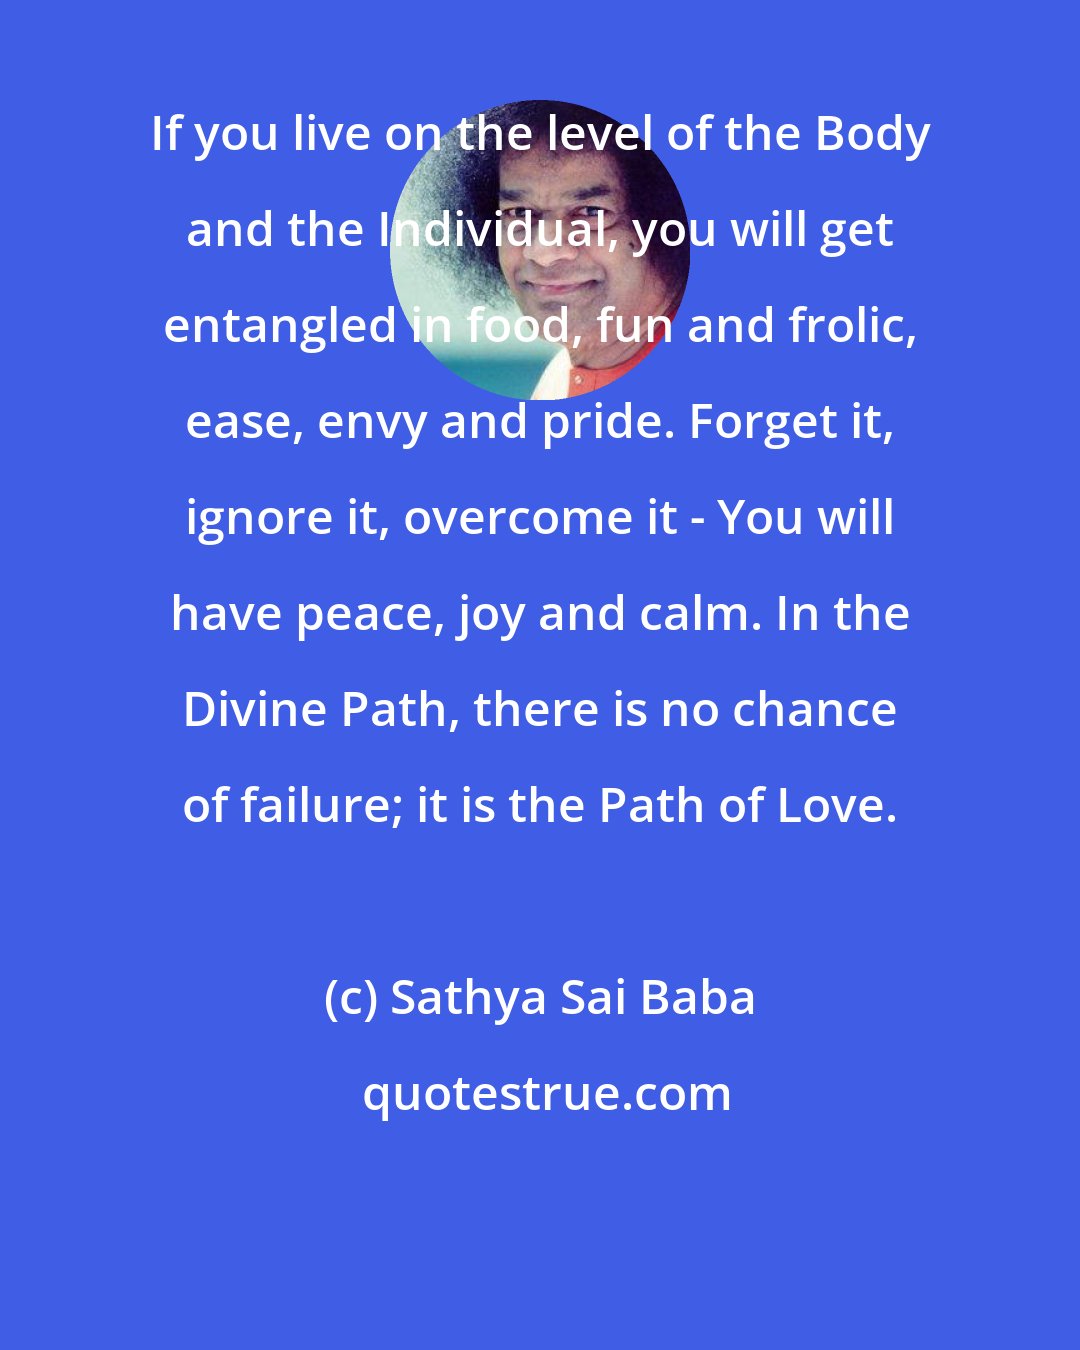 Sathya Sai Baba: If you live on the level of the Body and the Individual, you will get entangled in food, fun and frolic, ease, envy and pride. Forget it, ignore it, overcome it - You will have peace, joy and calm. In the Divine Path, there is no chance of failure; it is the Path of Love.